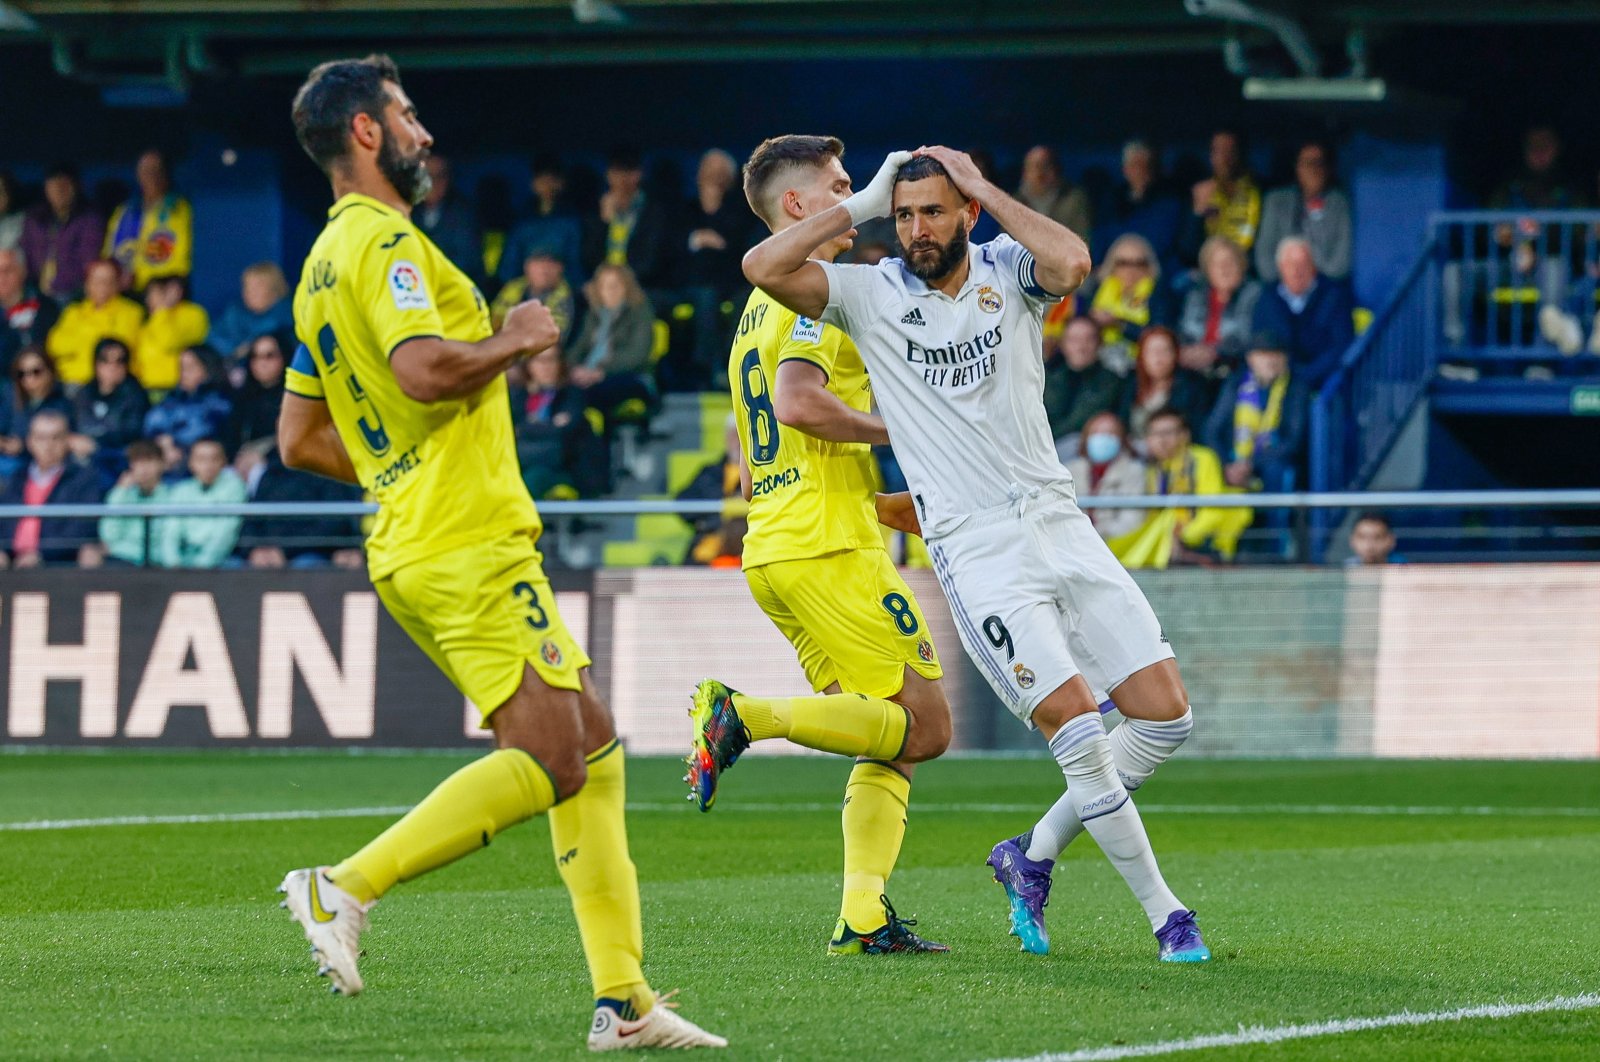 Villarreal’s Yellow Submarines shock Real Madrid with 2-1 defeat